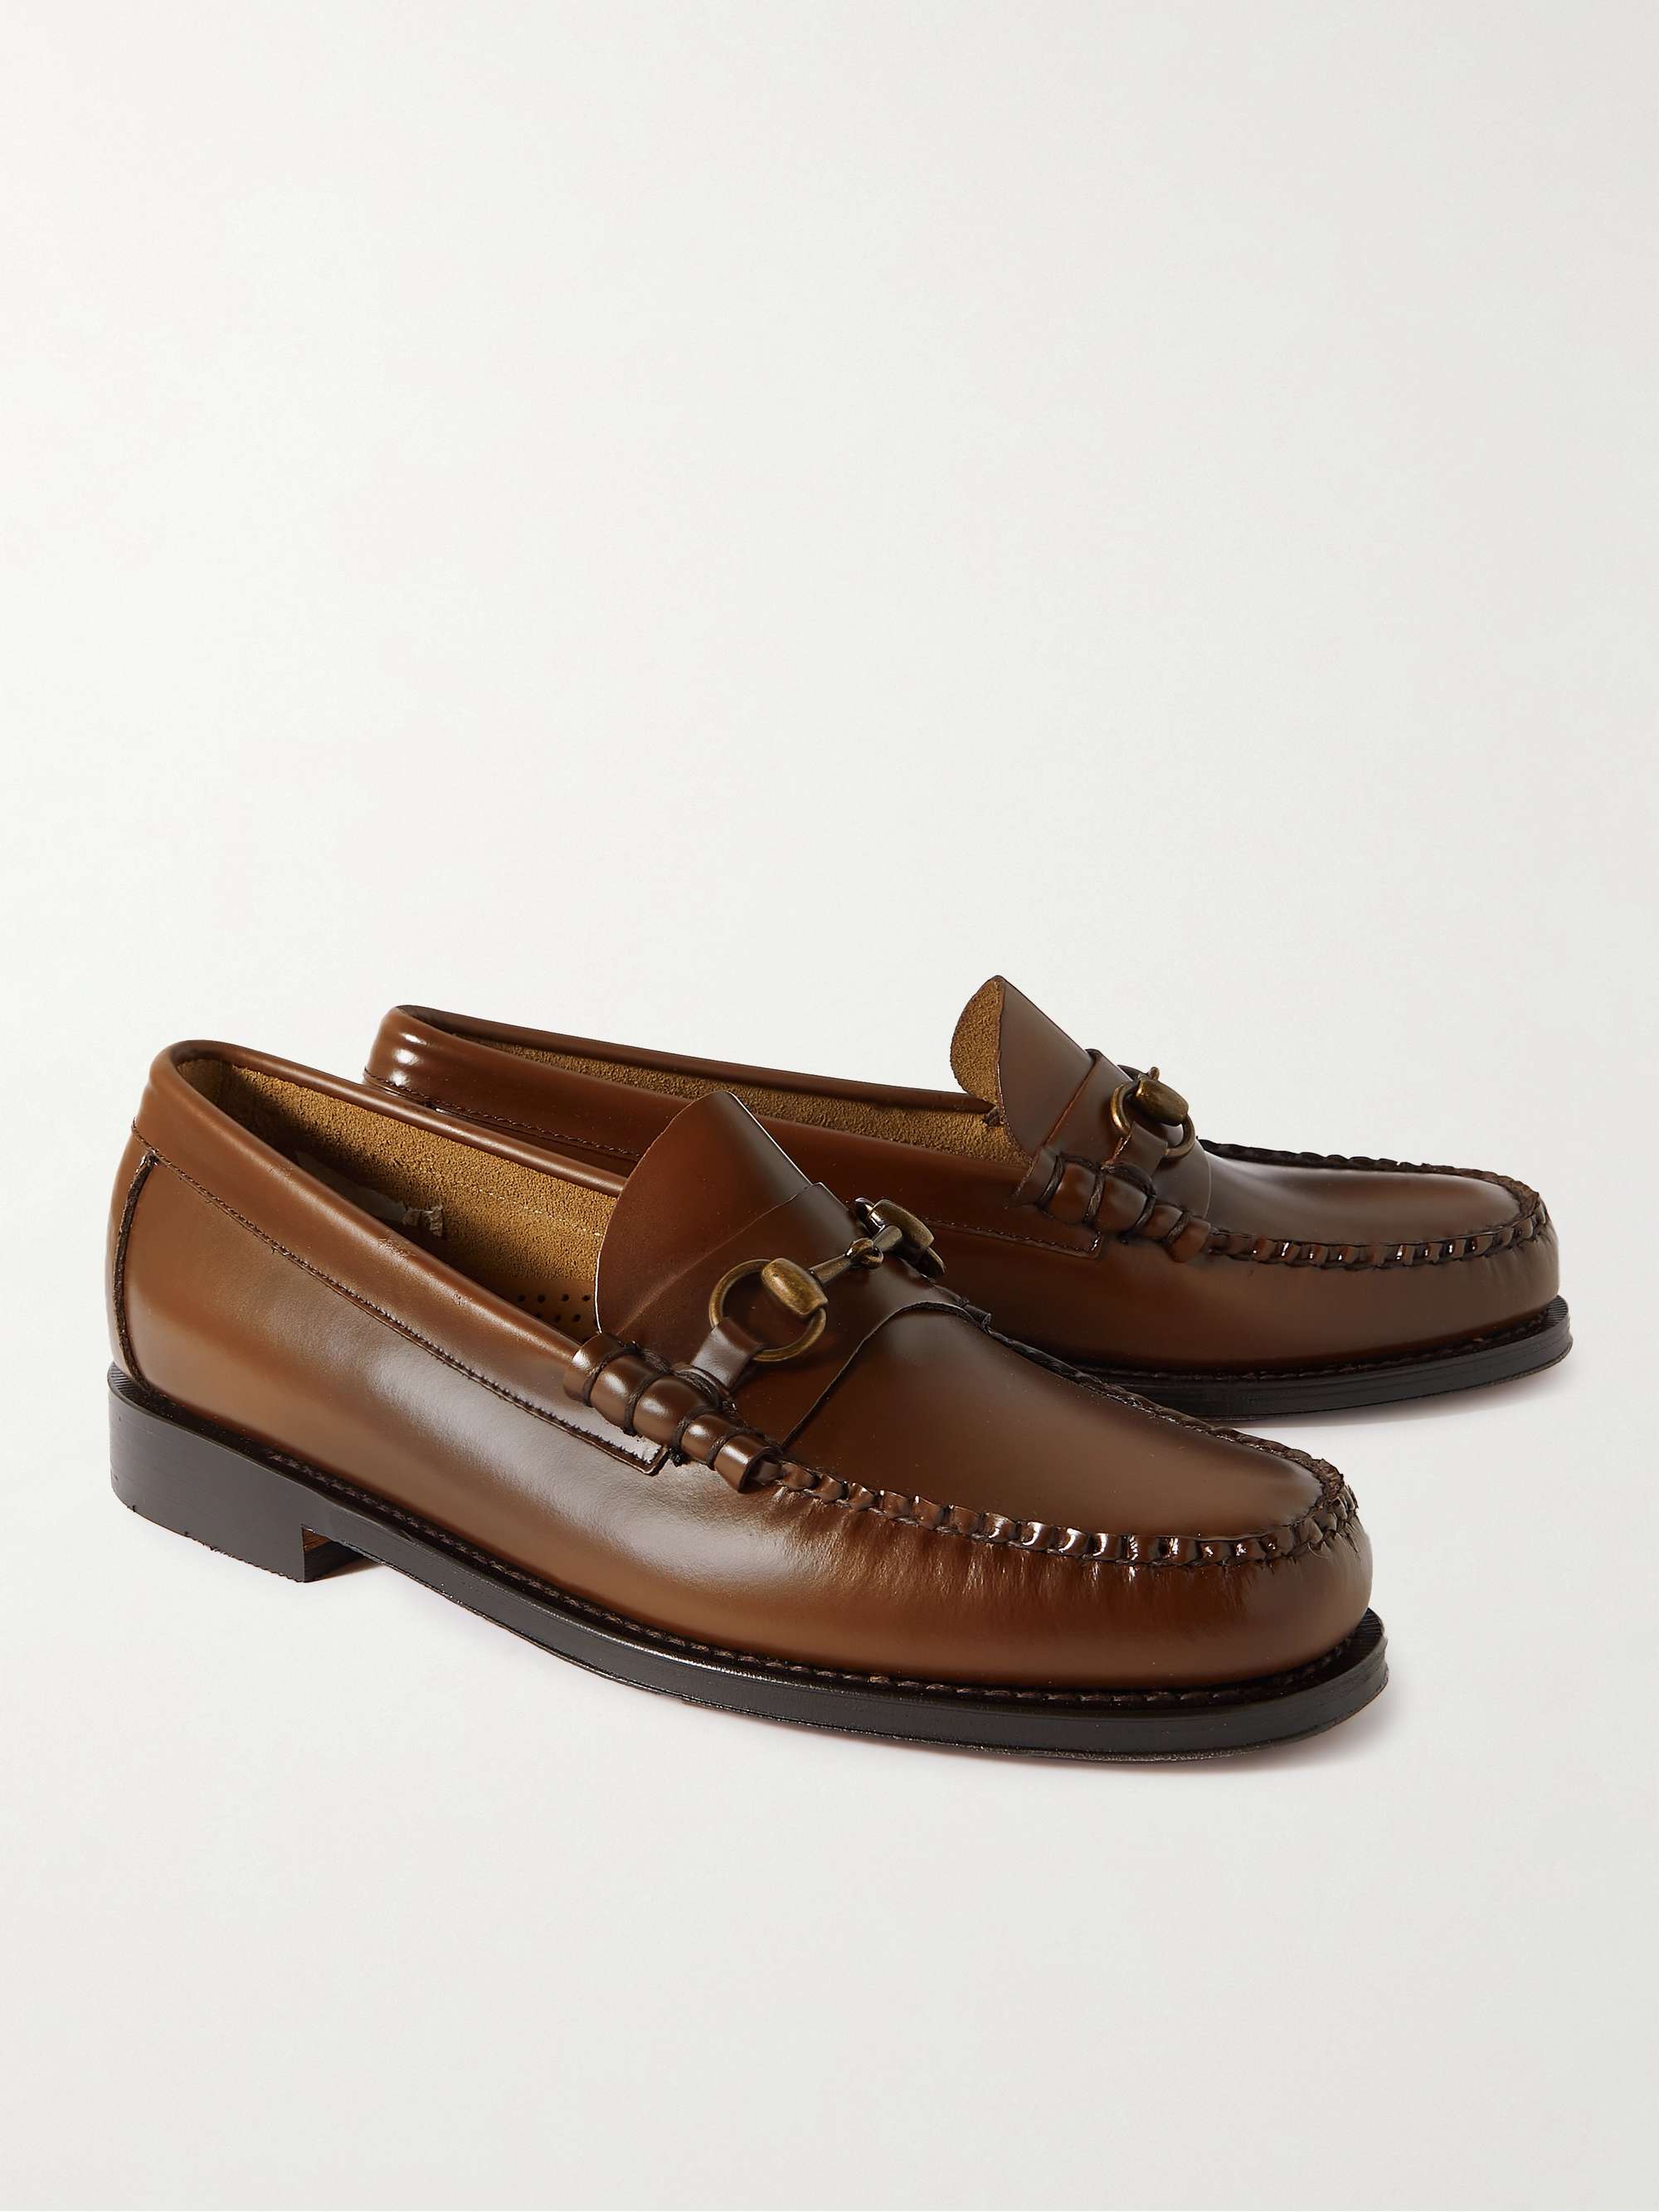 G.H. BASS & CO. Weejuns Heritage Lincoln Horsebit Leather Penny Loafers ...